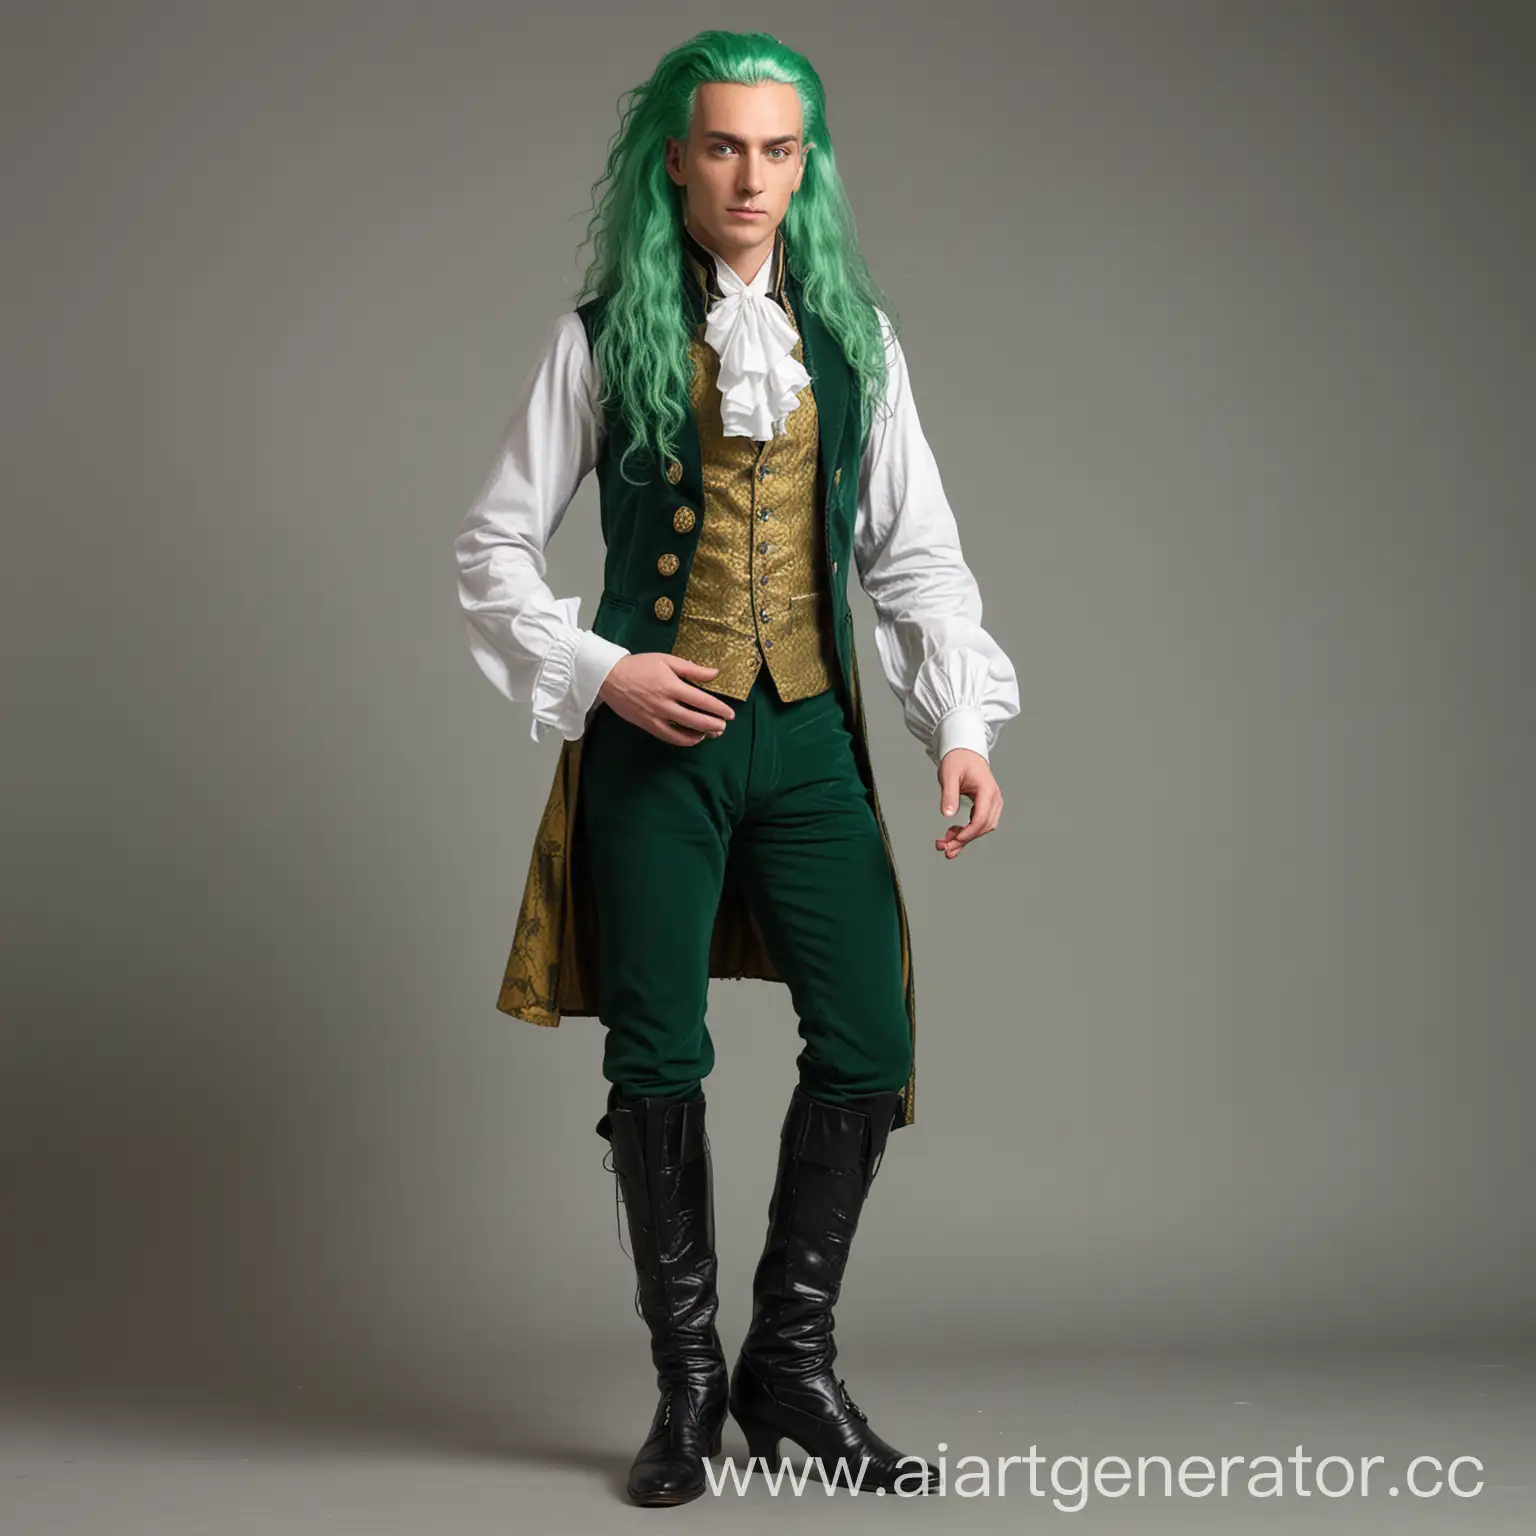 Elegant-Tall-Man-with-Green-Hair-and-Six-Wings-in-18th-Century-Waistcoat